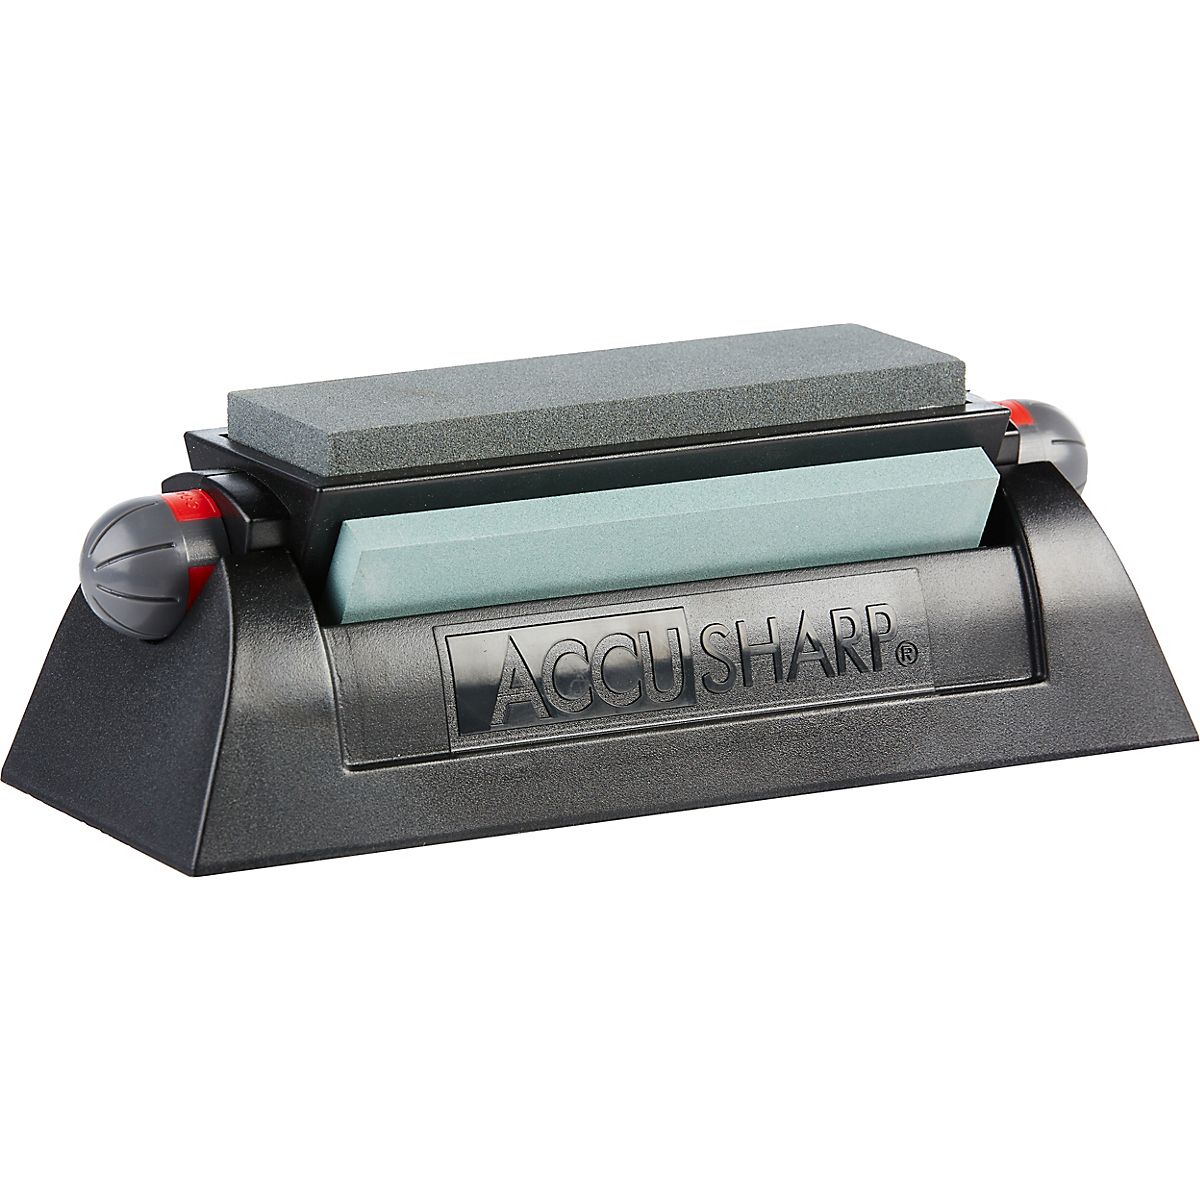  AccuSharp Stone Knife & Tool Sharpening System - Tri-Stone  Knife Sharpener Kit with Mountable Rubber-Grip Base - Quickly Sharpens,  Restores, Repairs & Hones All Tools, Blades & Knives : Home 